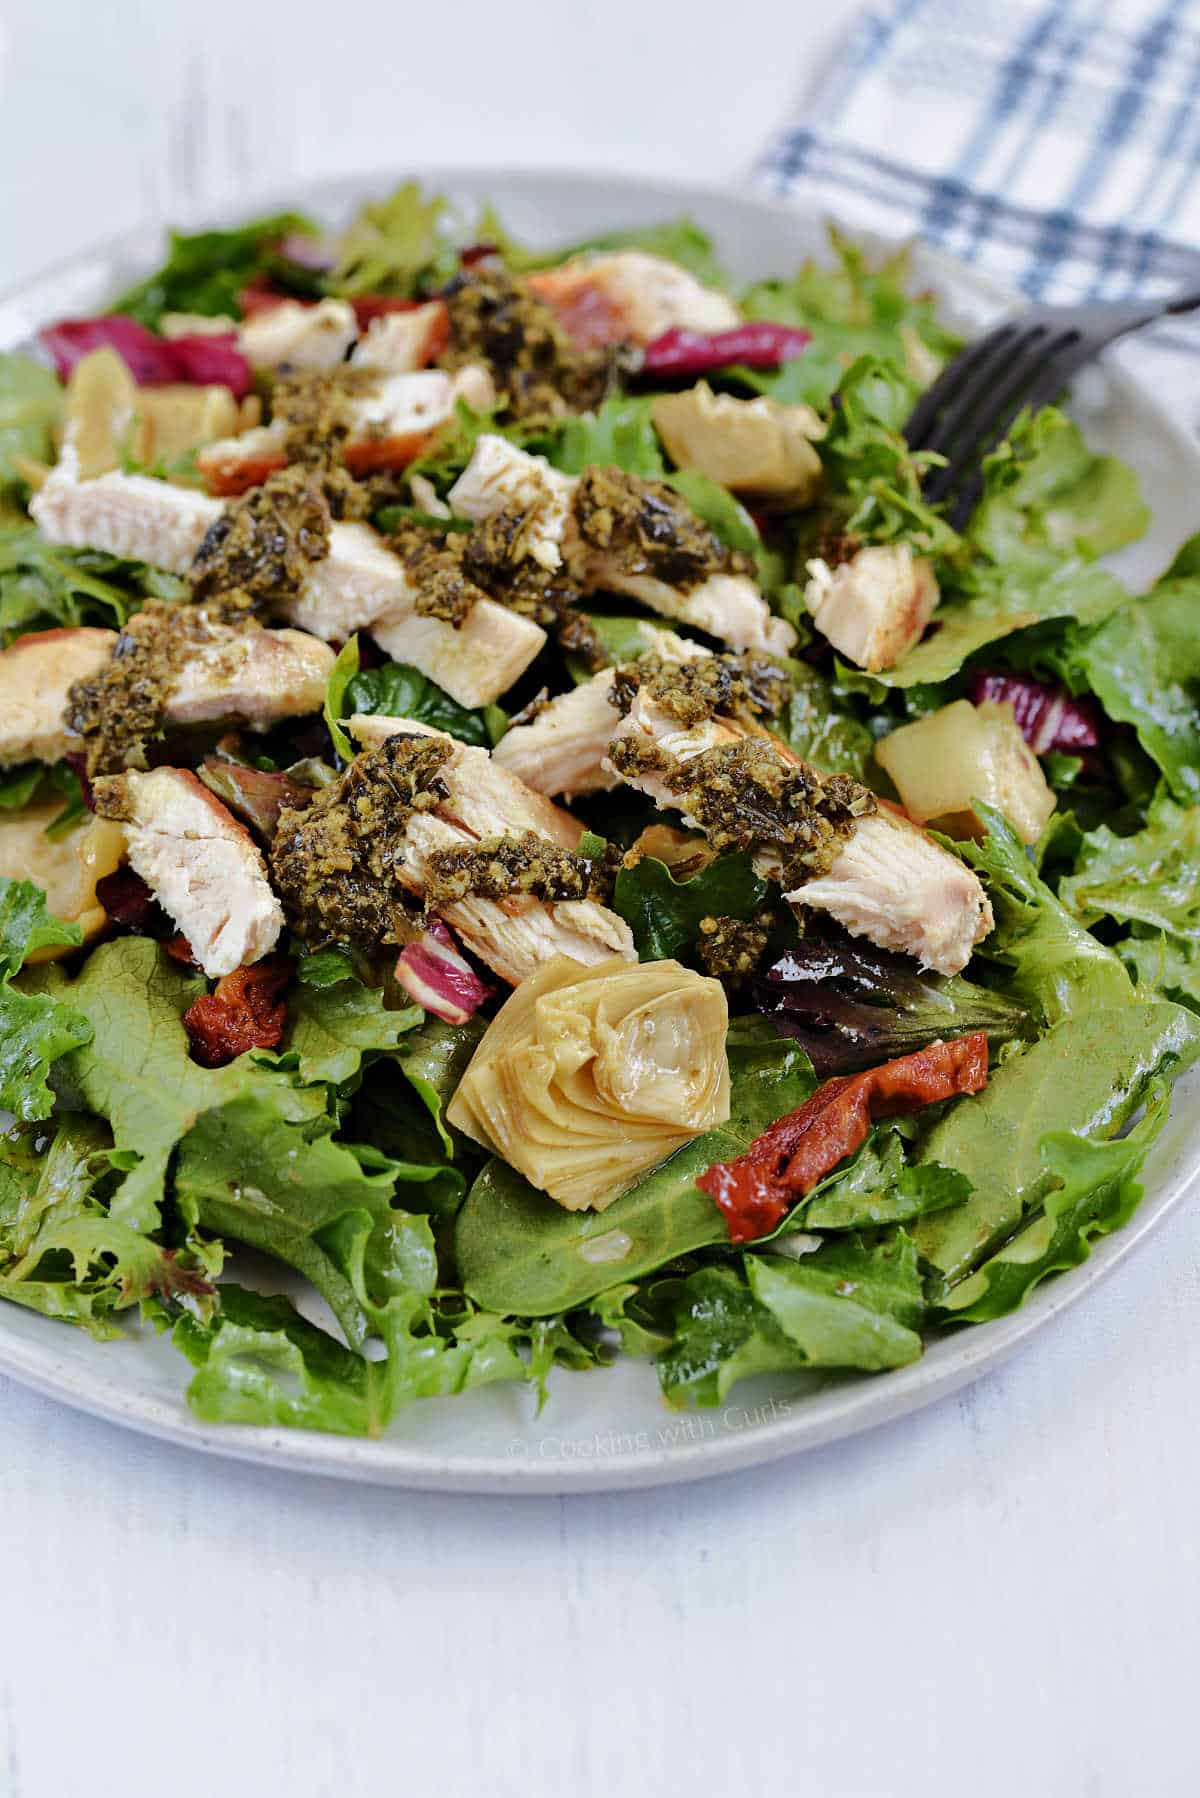 Mixed salad greens tossed with artichoke hearts, sun-dried tomatoes and a light dressing with sliced chicken drizzled with pesto on a large white plate.